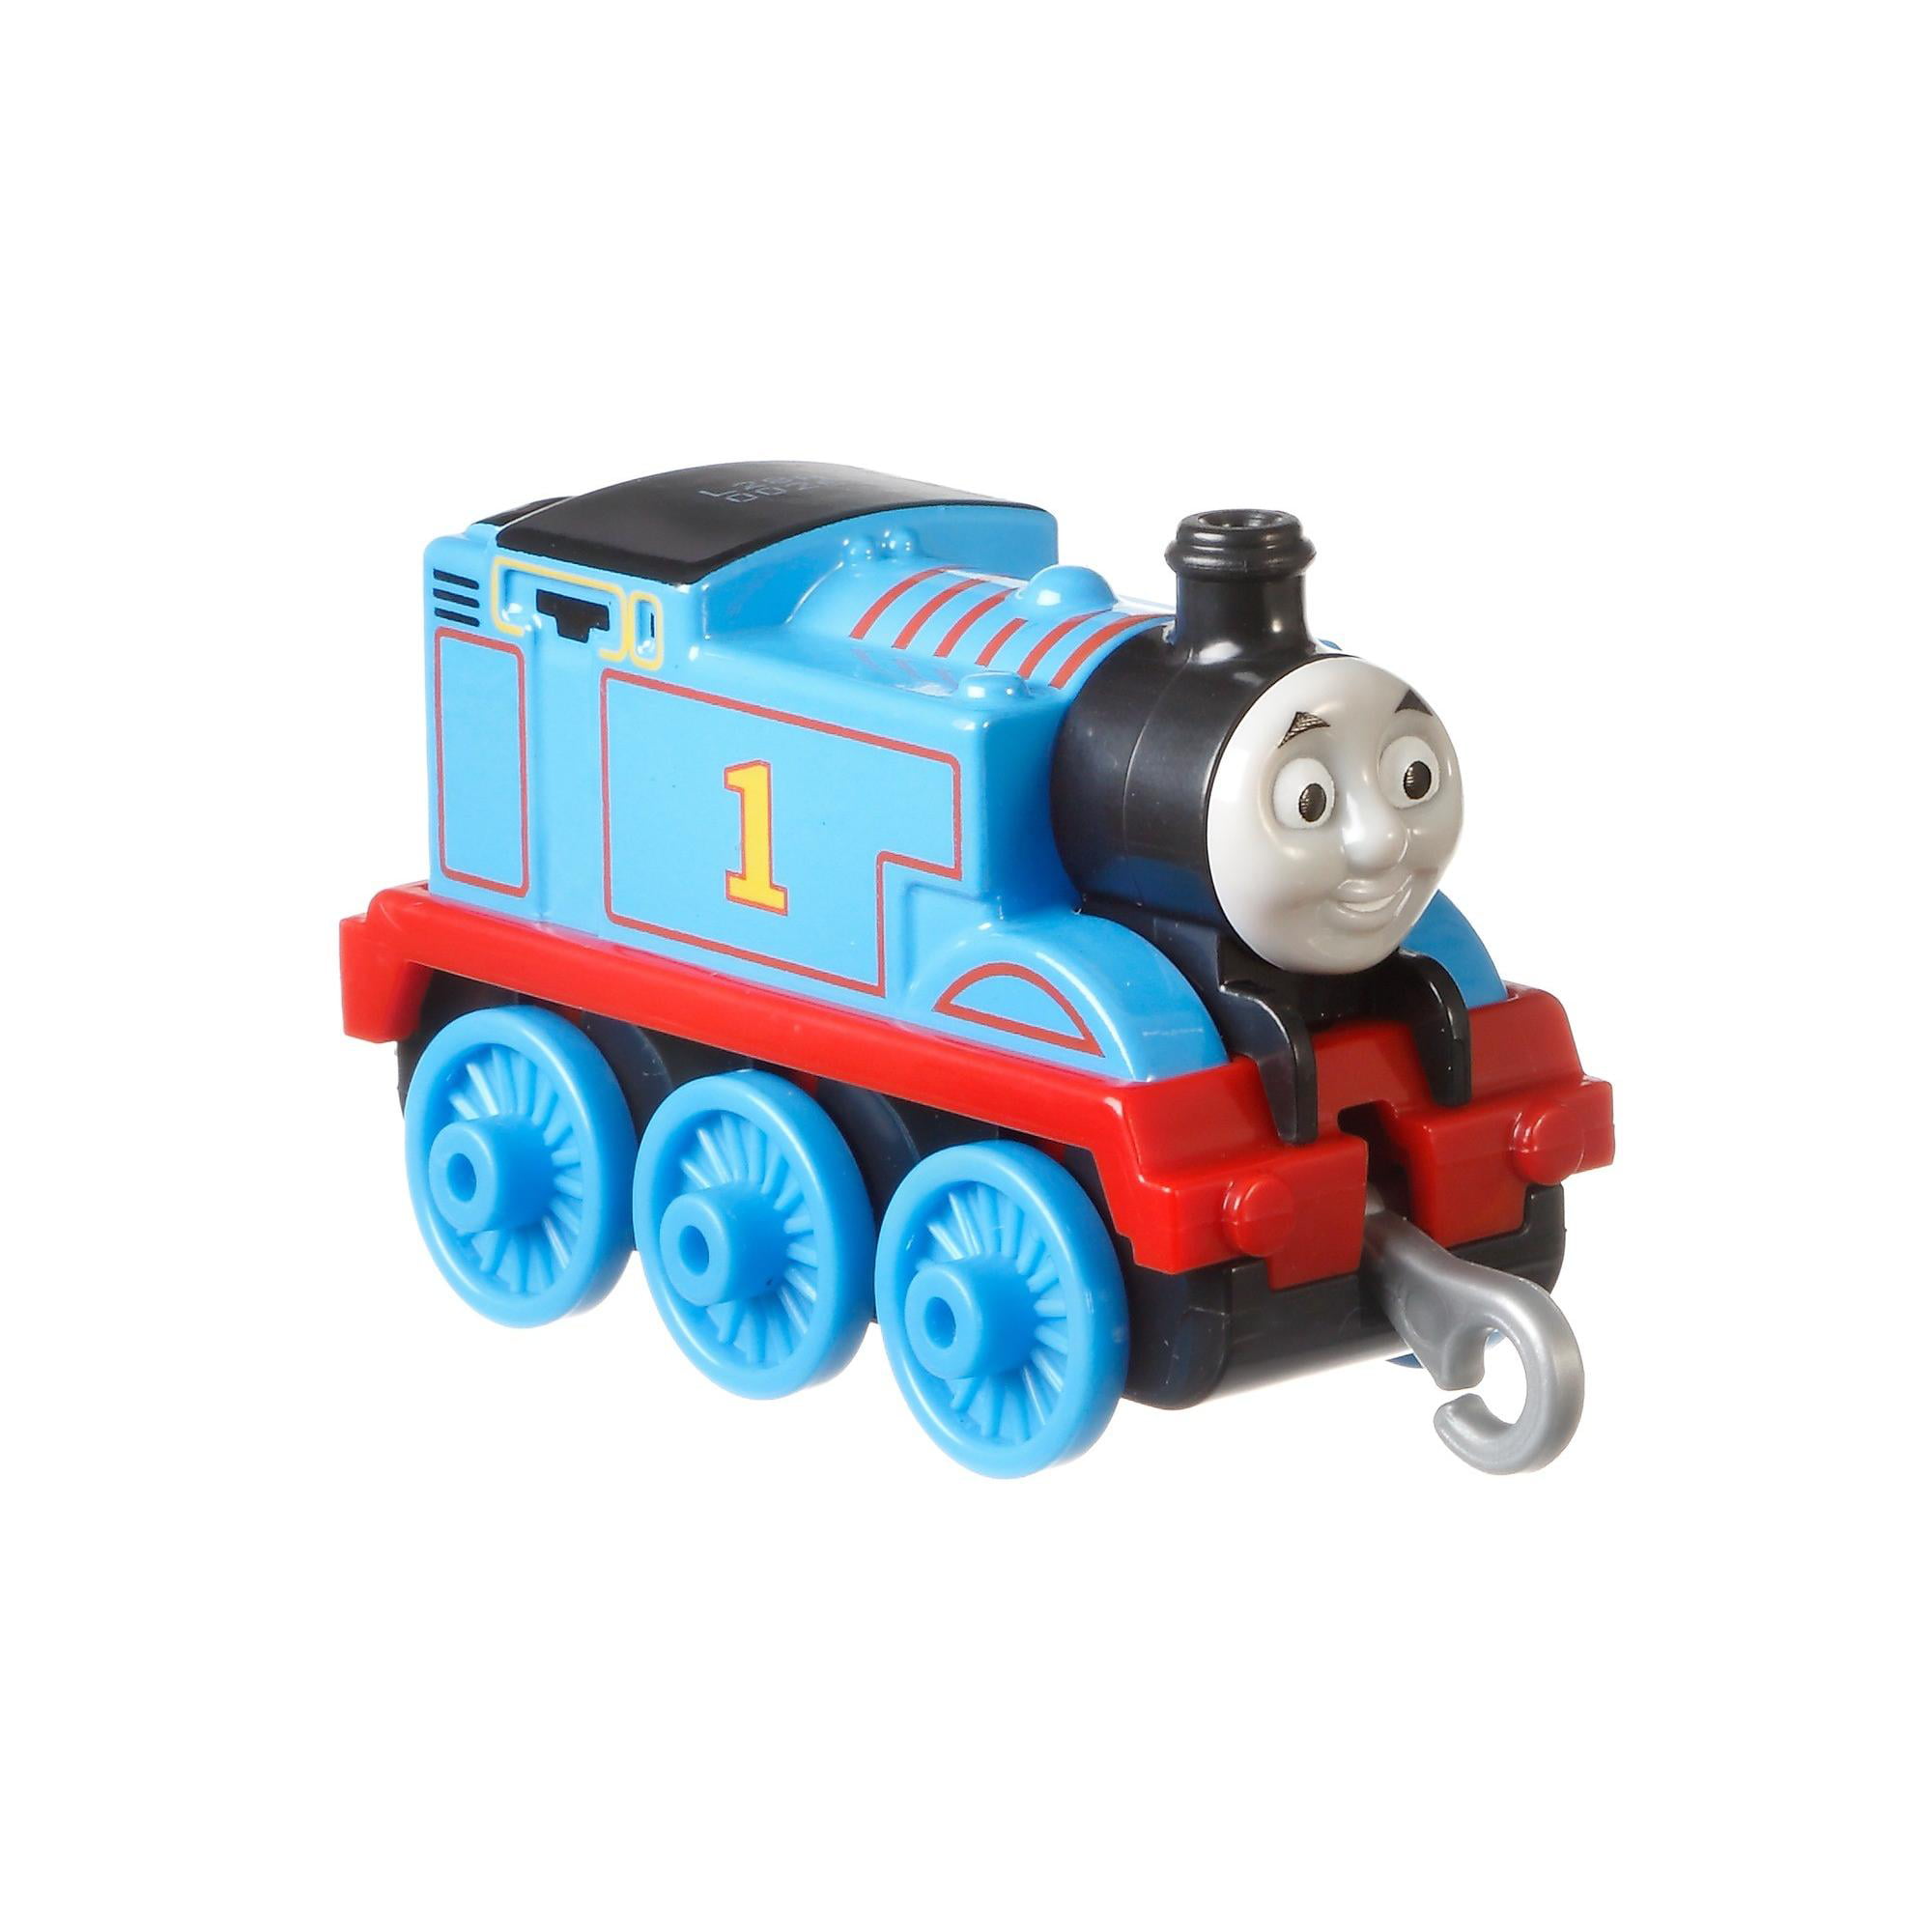 Thomas The Tank Engine Trackmaster Trains ⭐️Multibuy Discount⭐️ add to basket 